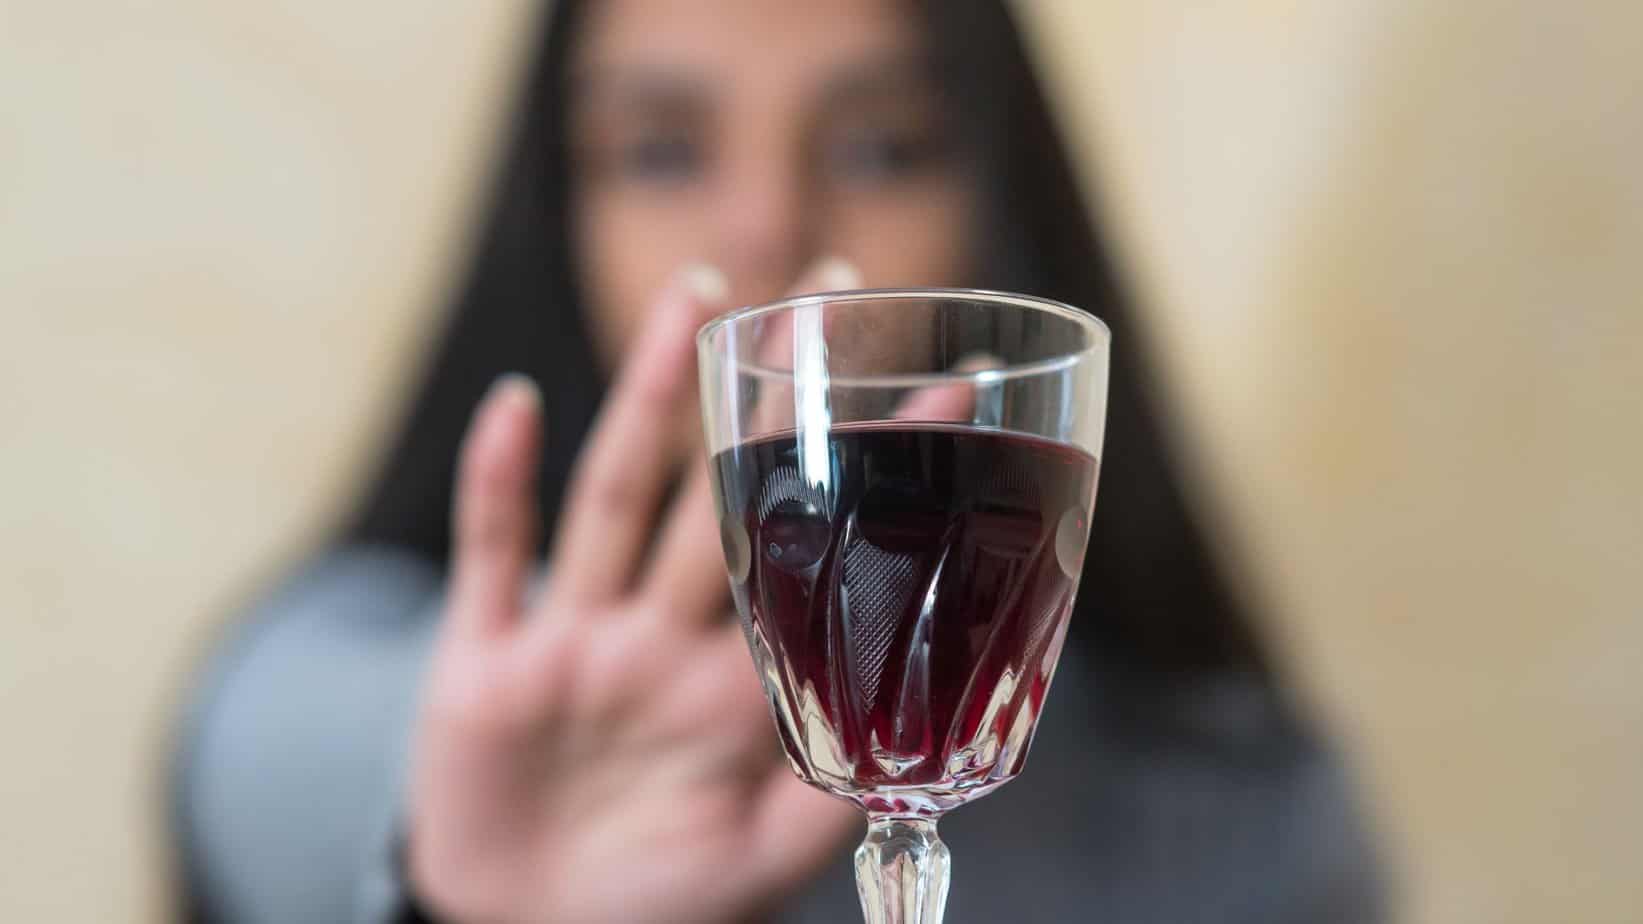 Glass of wine in front while woman behind reaches for it